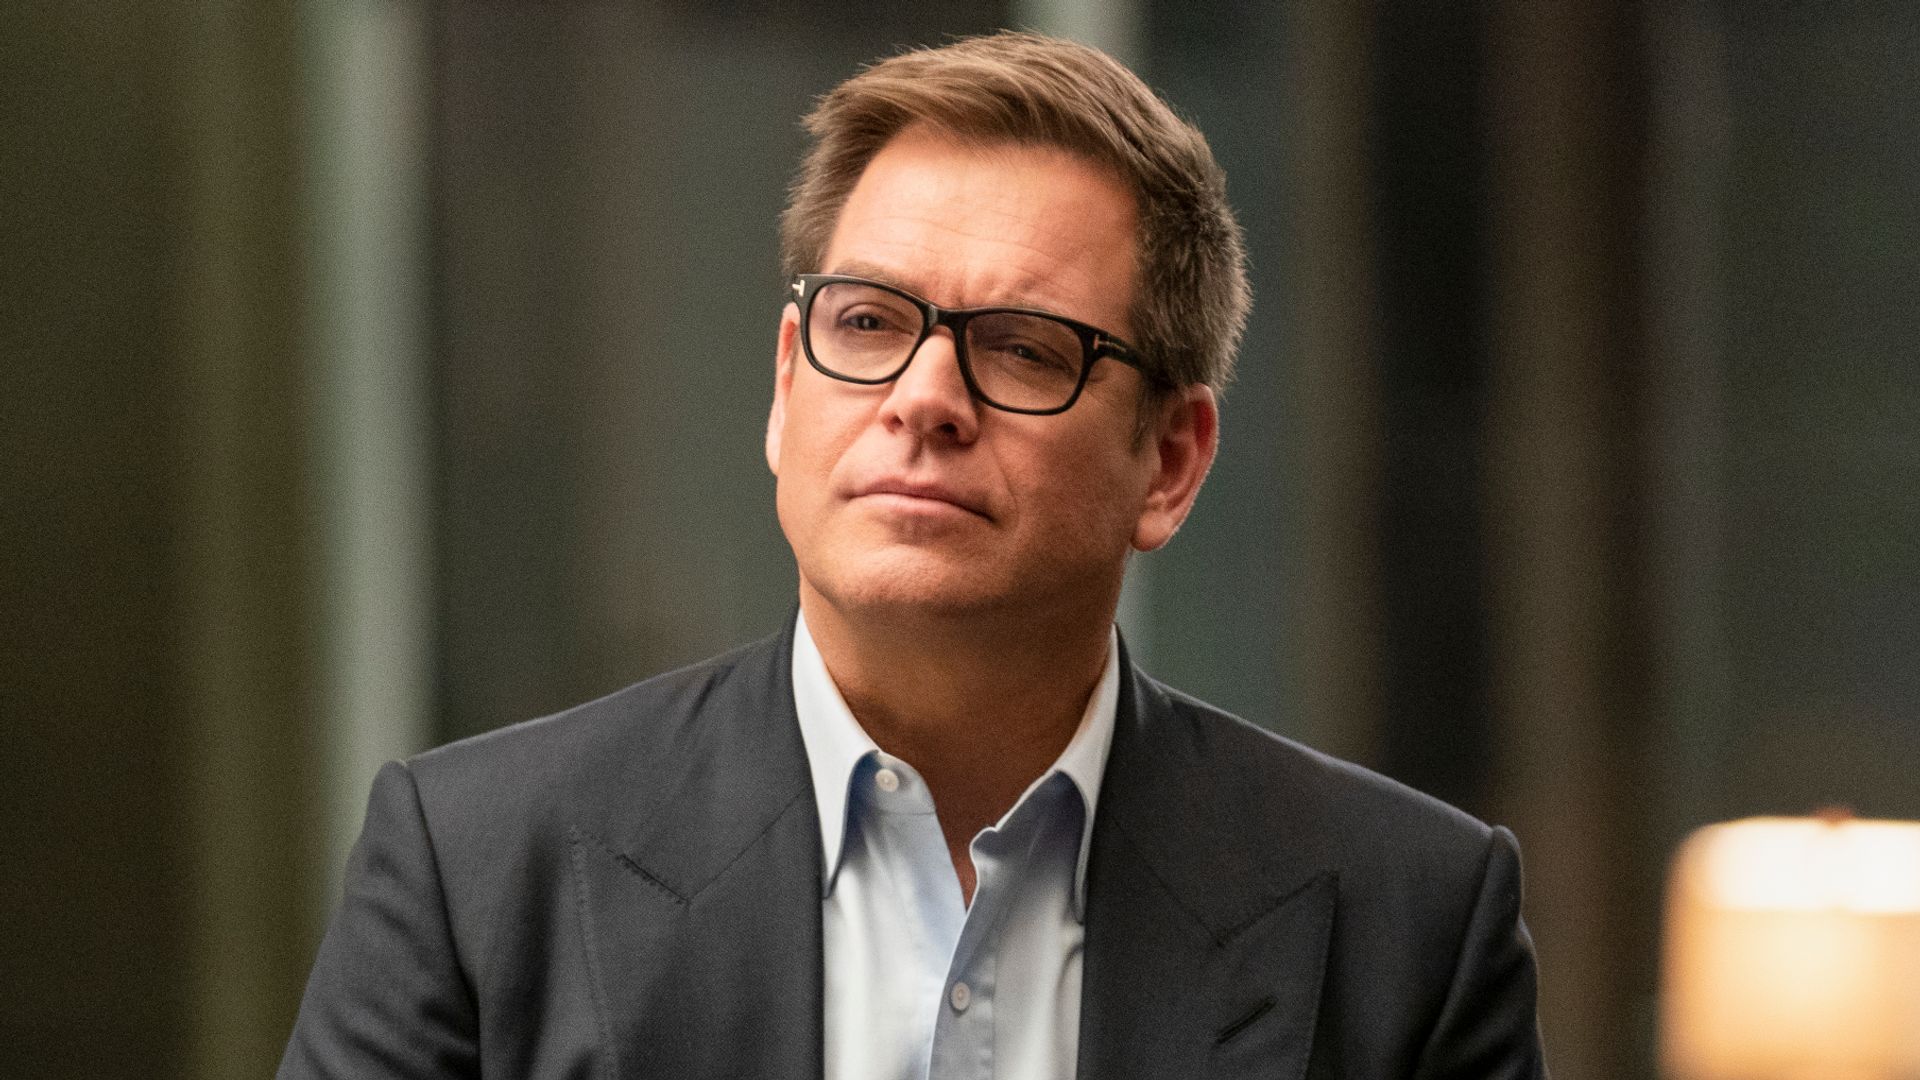 NCIS star Michael Weatherly, 54, reveals tragic death of younger brother - details